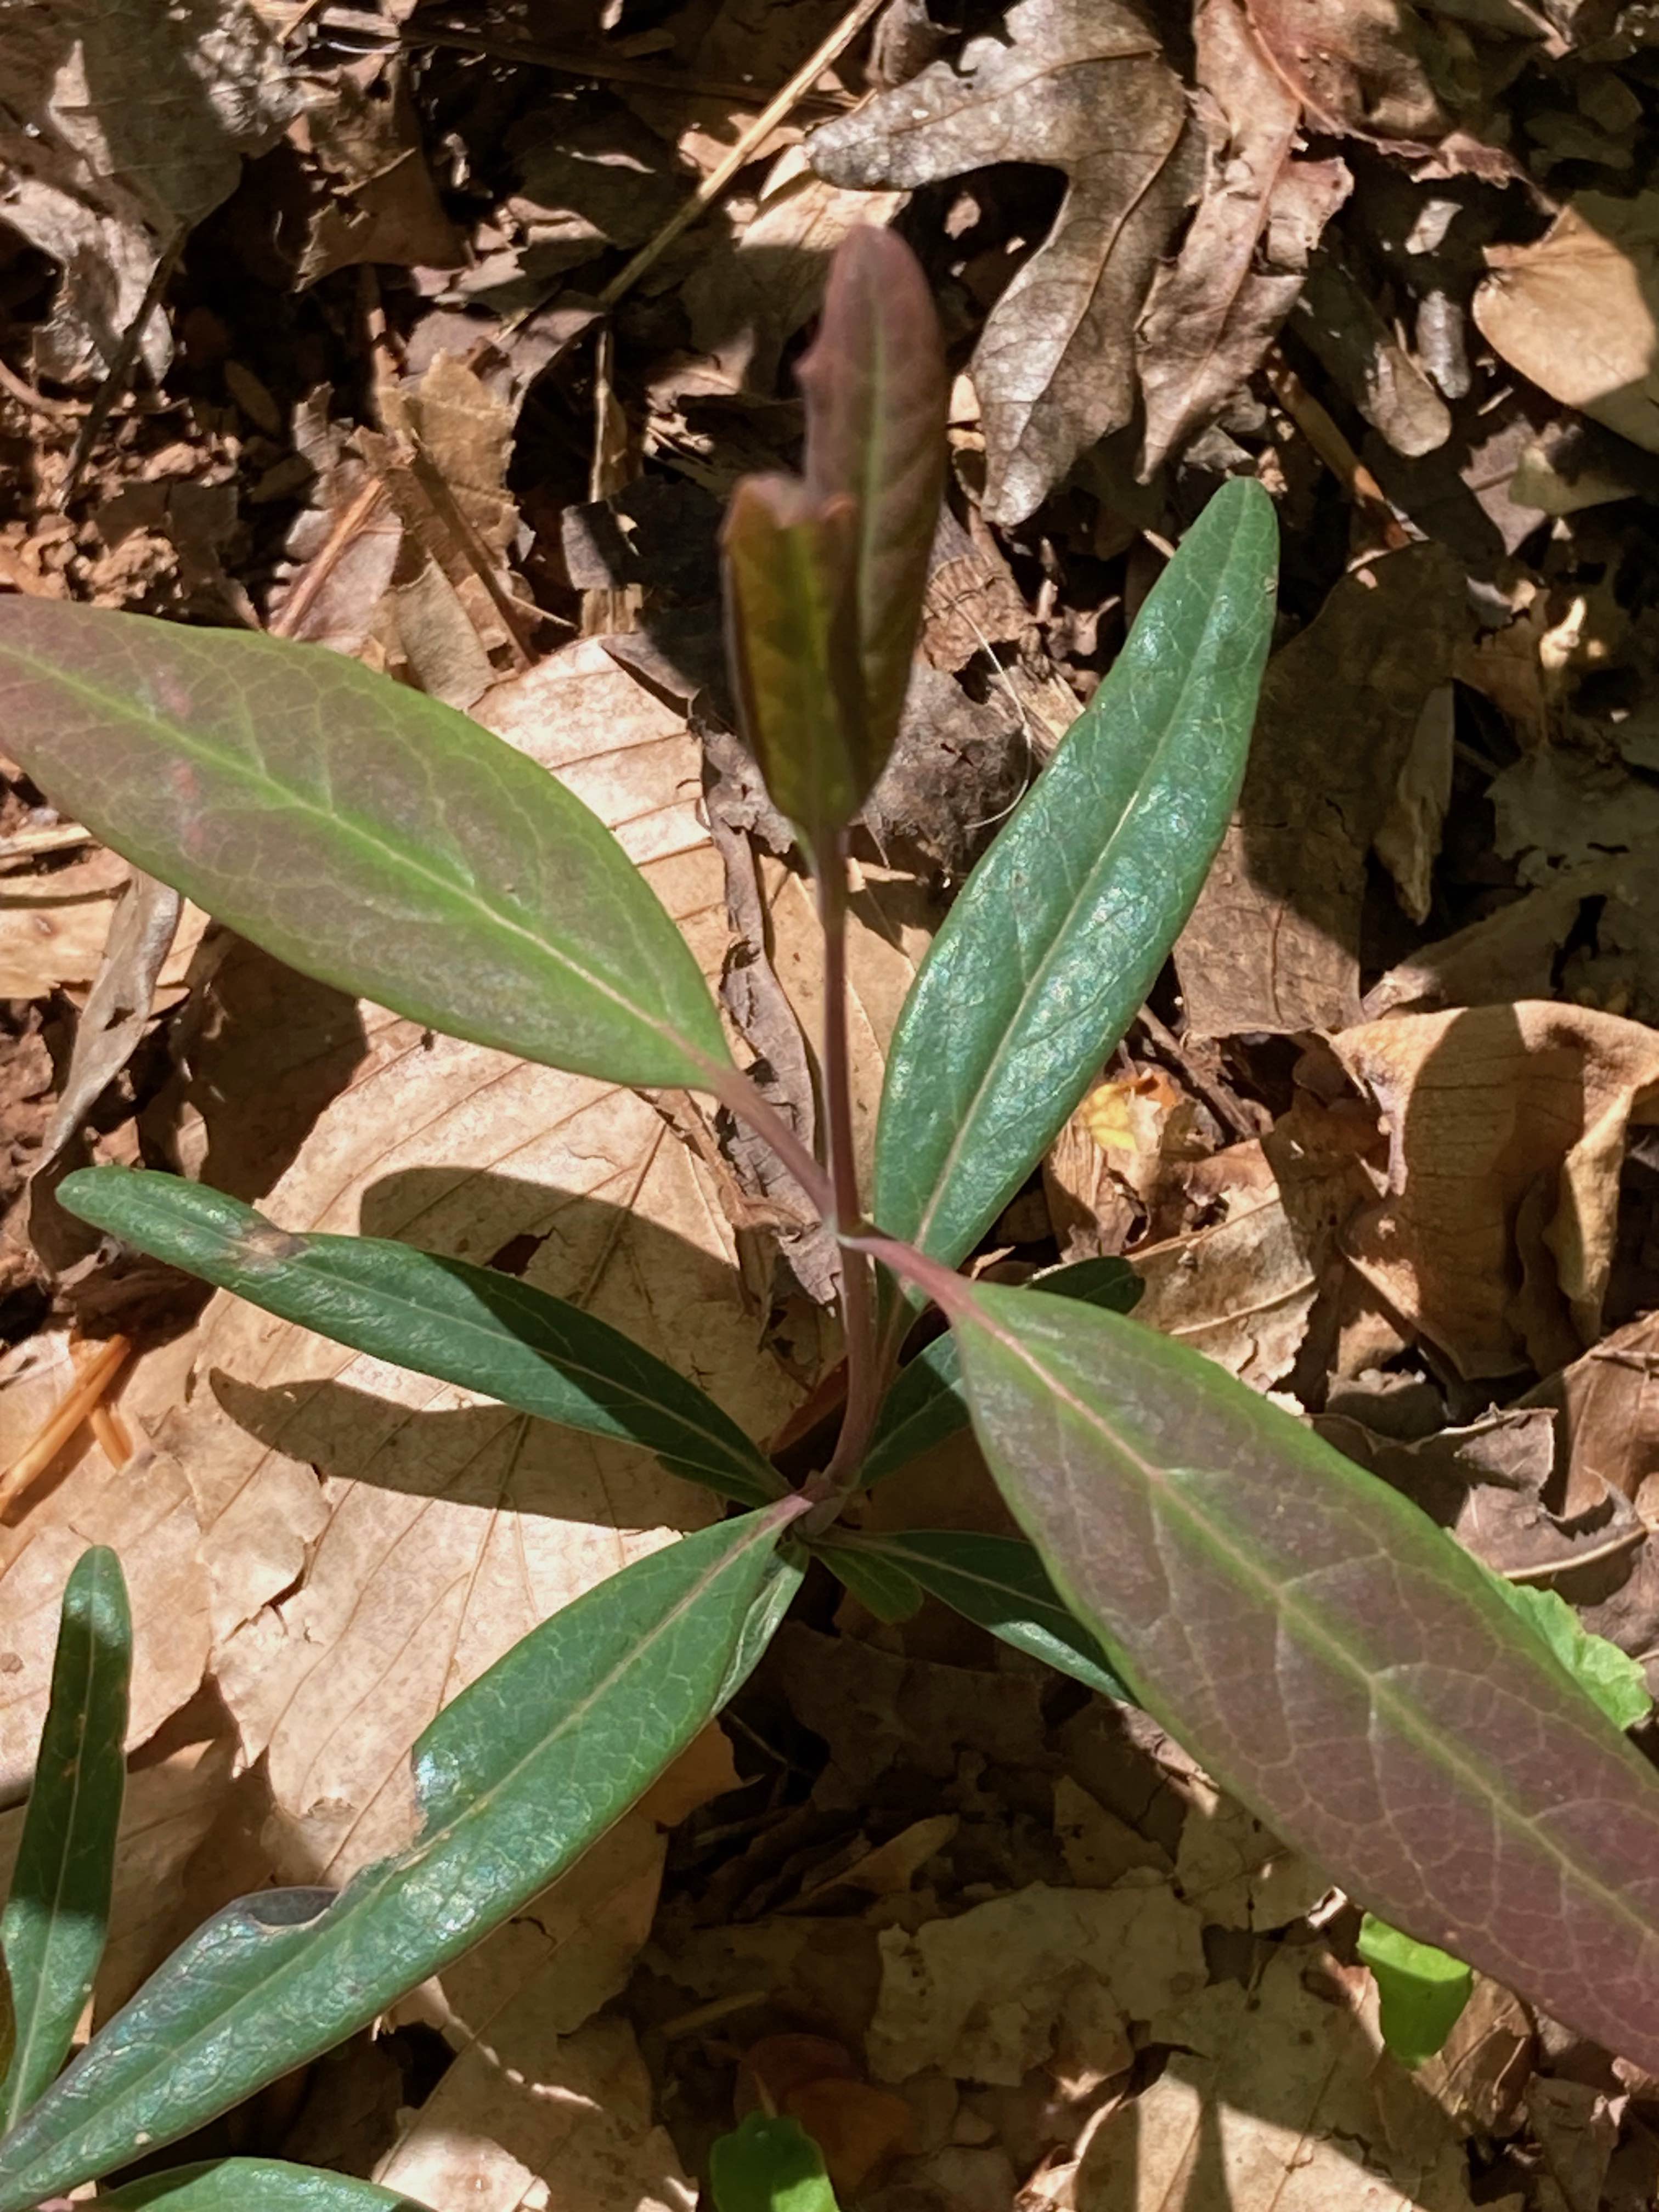 The Scientific Name is Lonicera sempervirens. You will likely hear them called Trumpet Honeysuckle, Coral Honeysuckle, Woodbine. This picture shows the Newly emerged leaves in early spring. Leaf shape can vary from narrow to wide. of Lonicera sempervirens